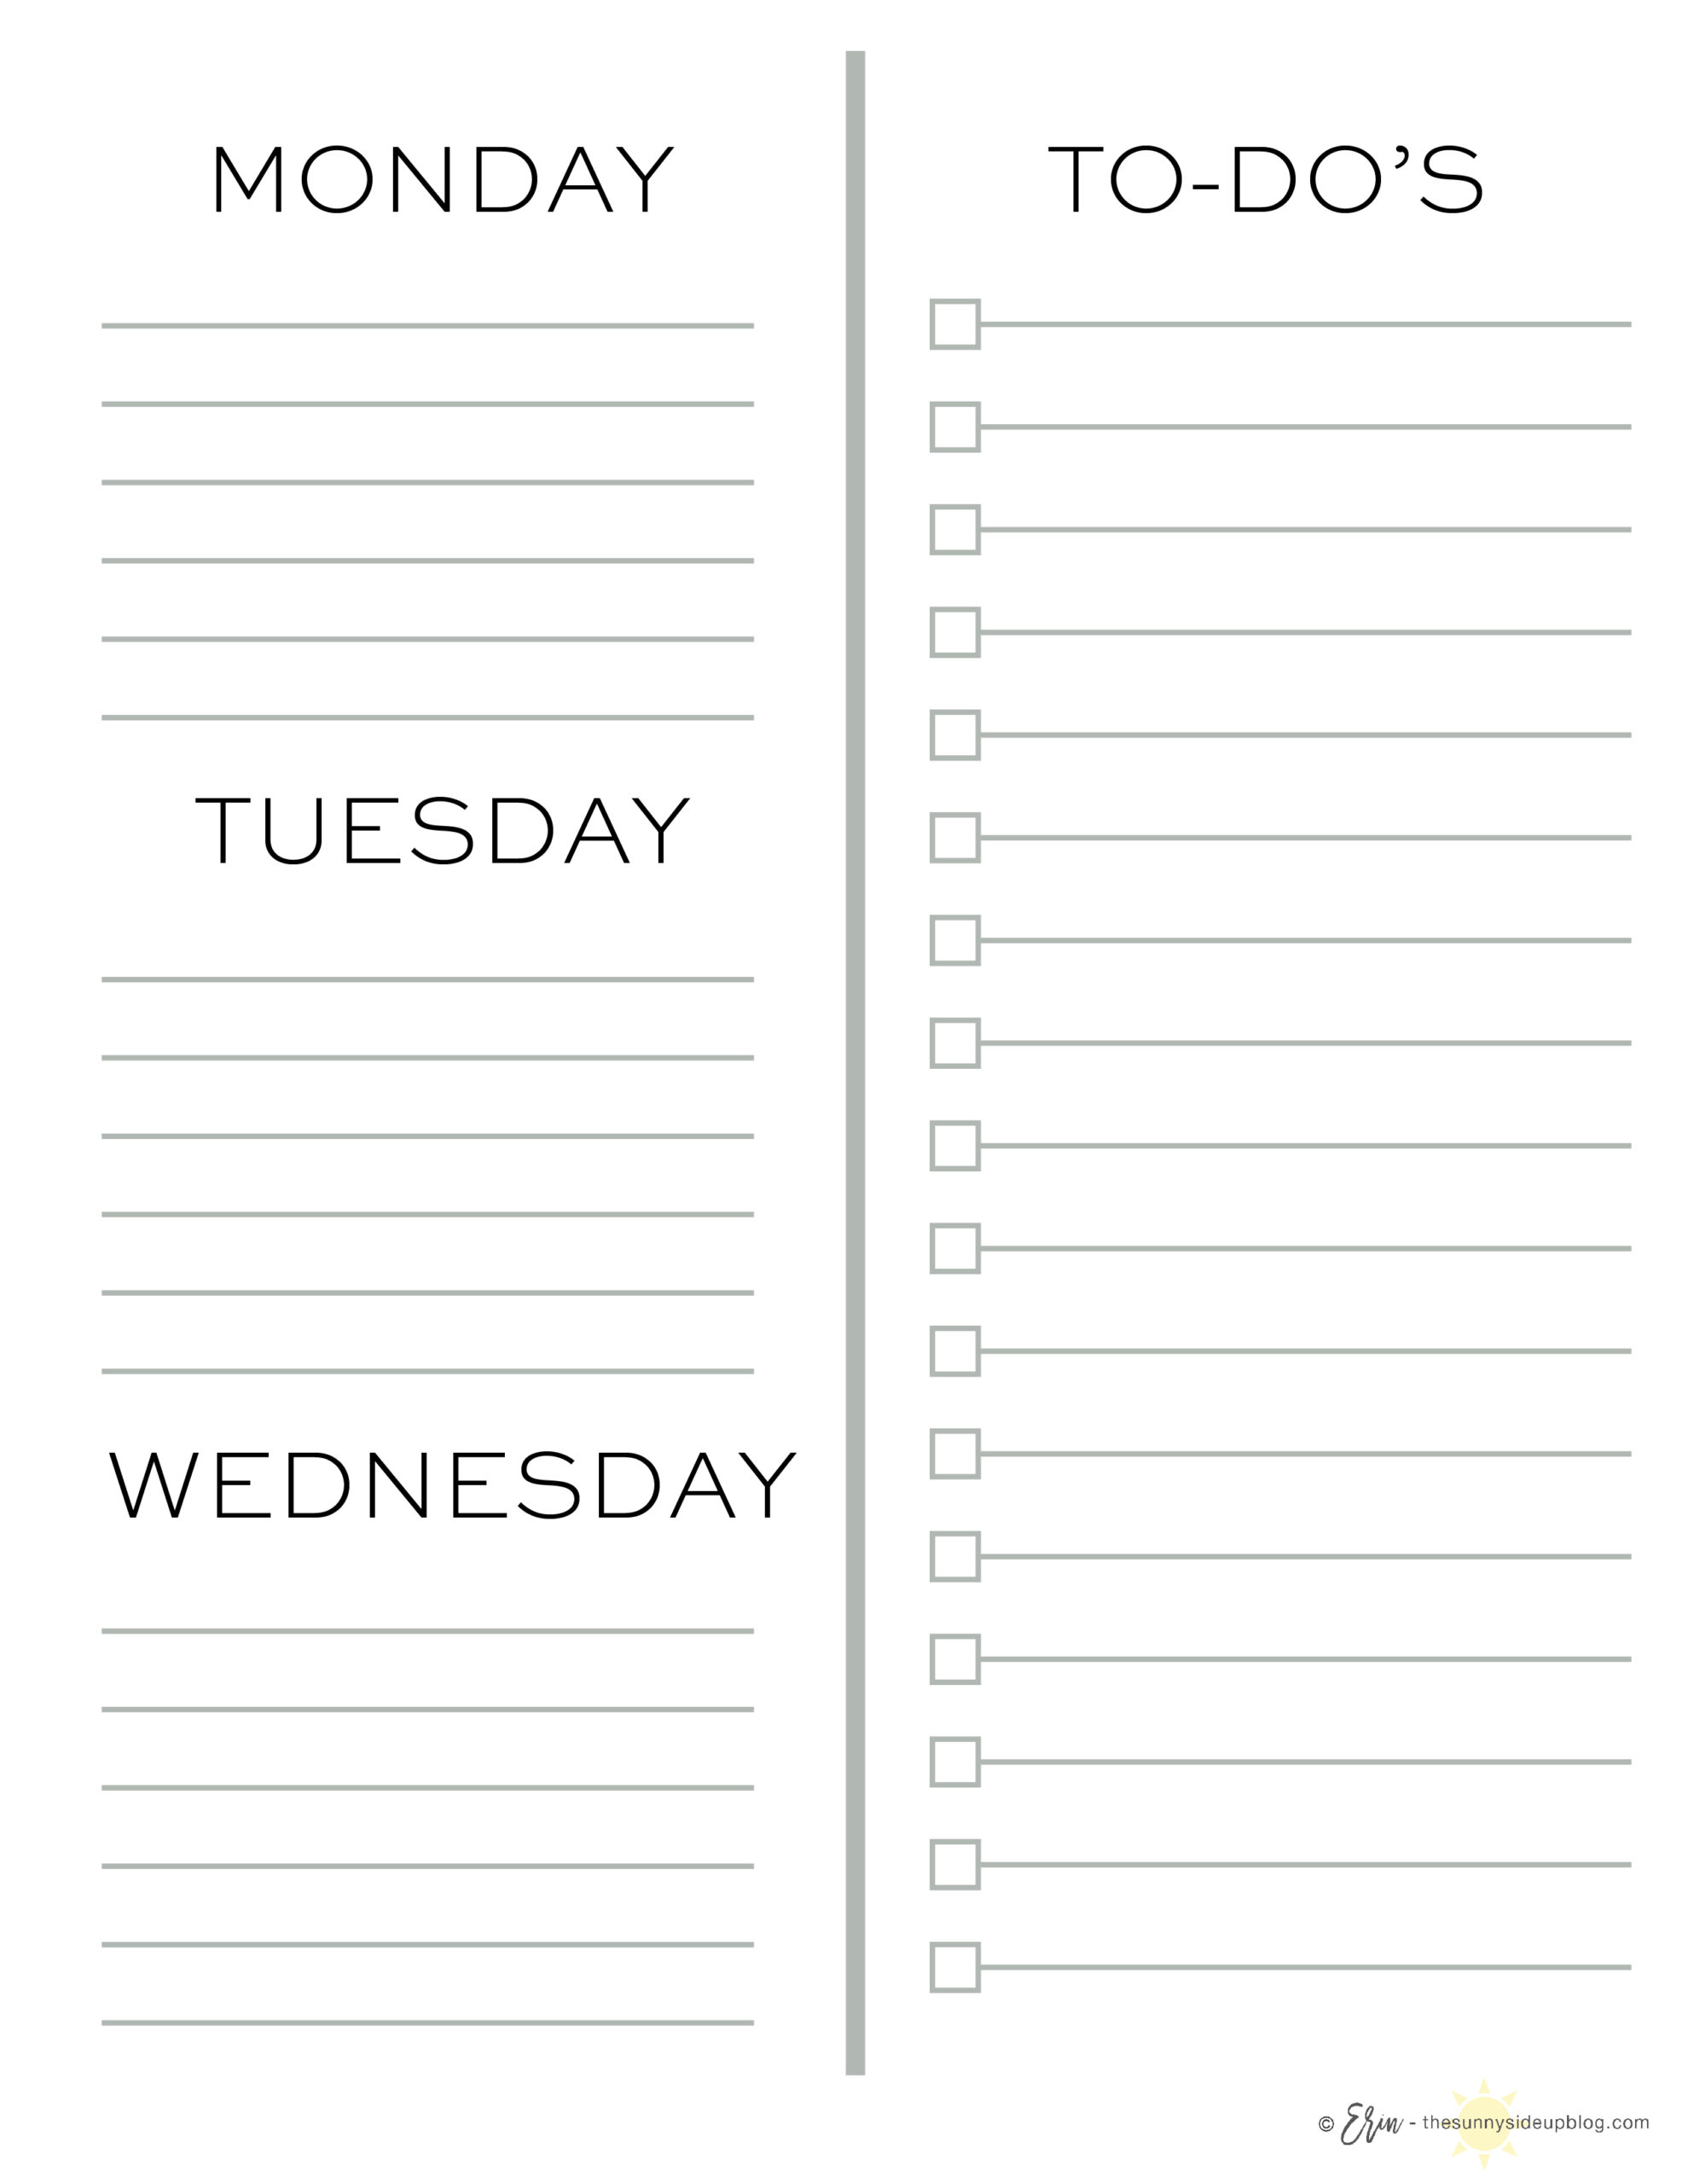 Weekly To-Do lists - The Sunny Side Up Blog